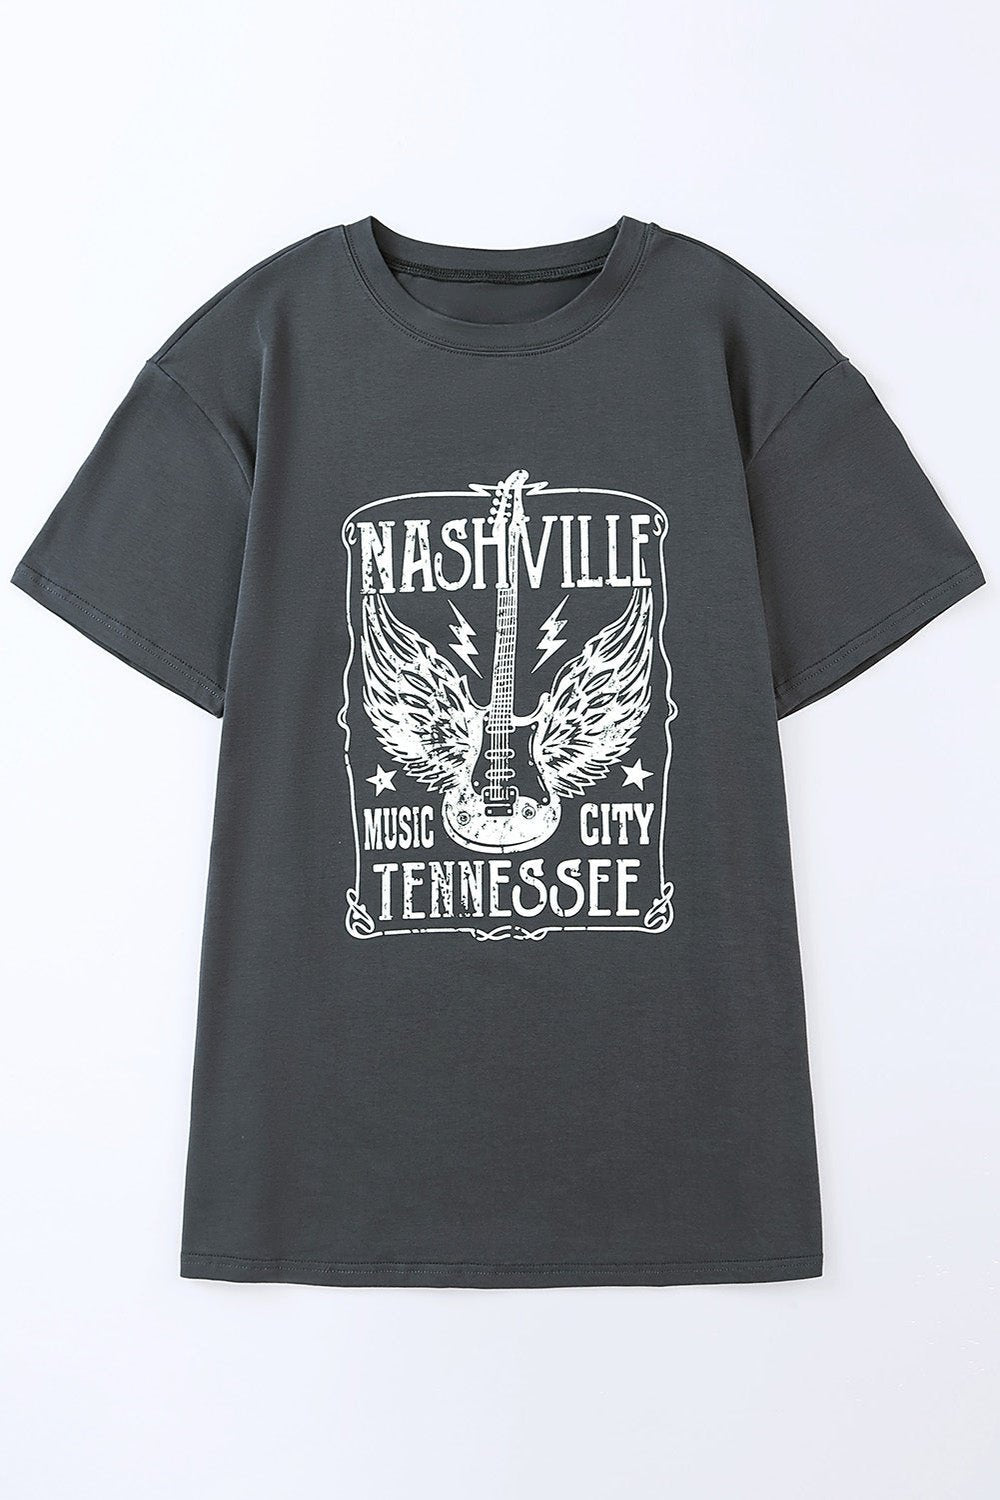 NASHVILLE MUSIC CITY TENNESSEE Graphic T-Shirt - T-Shirts - FITGGINS